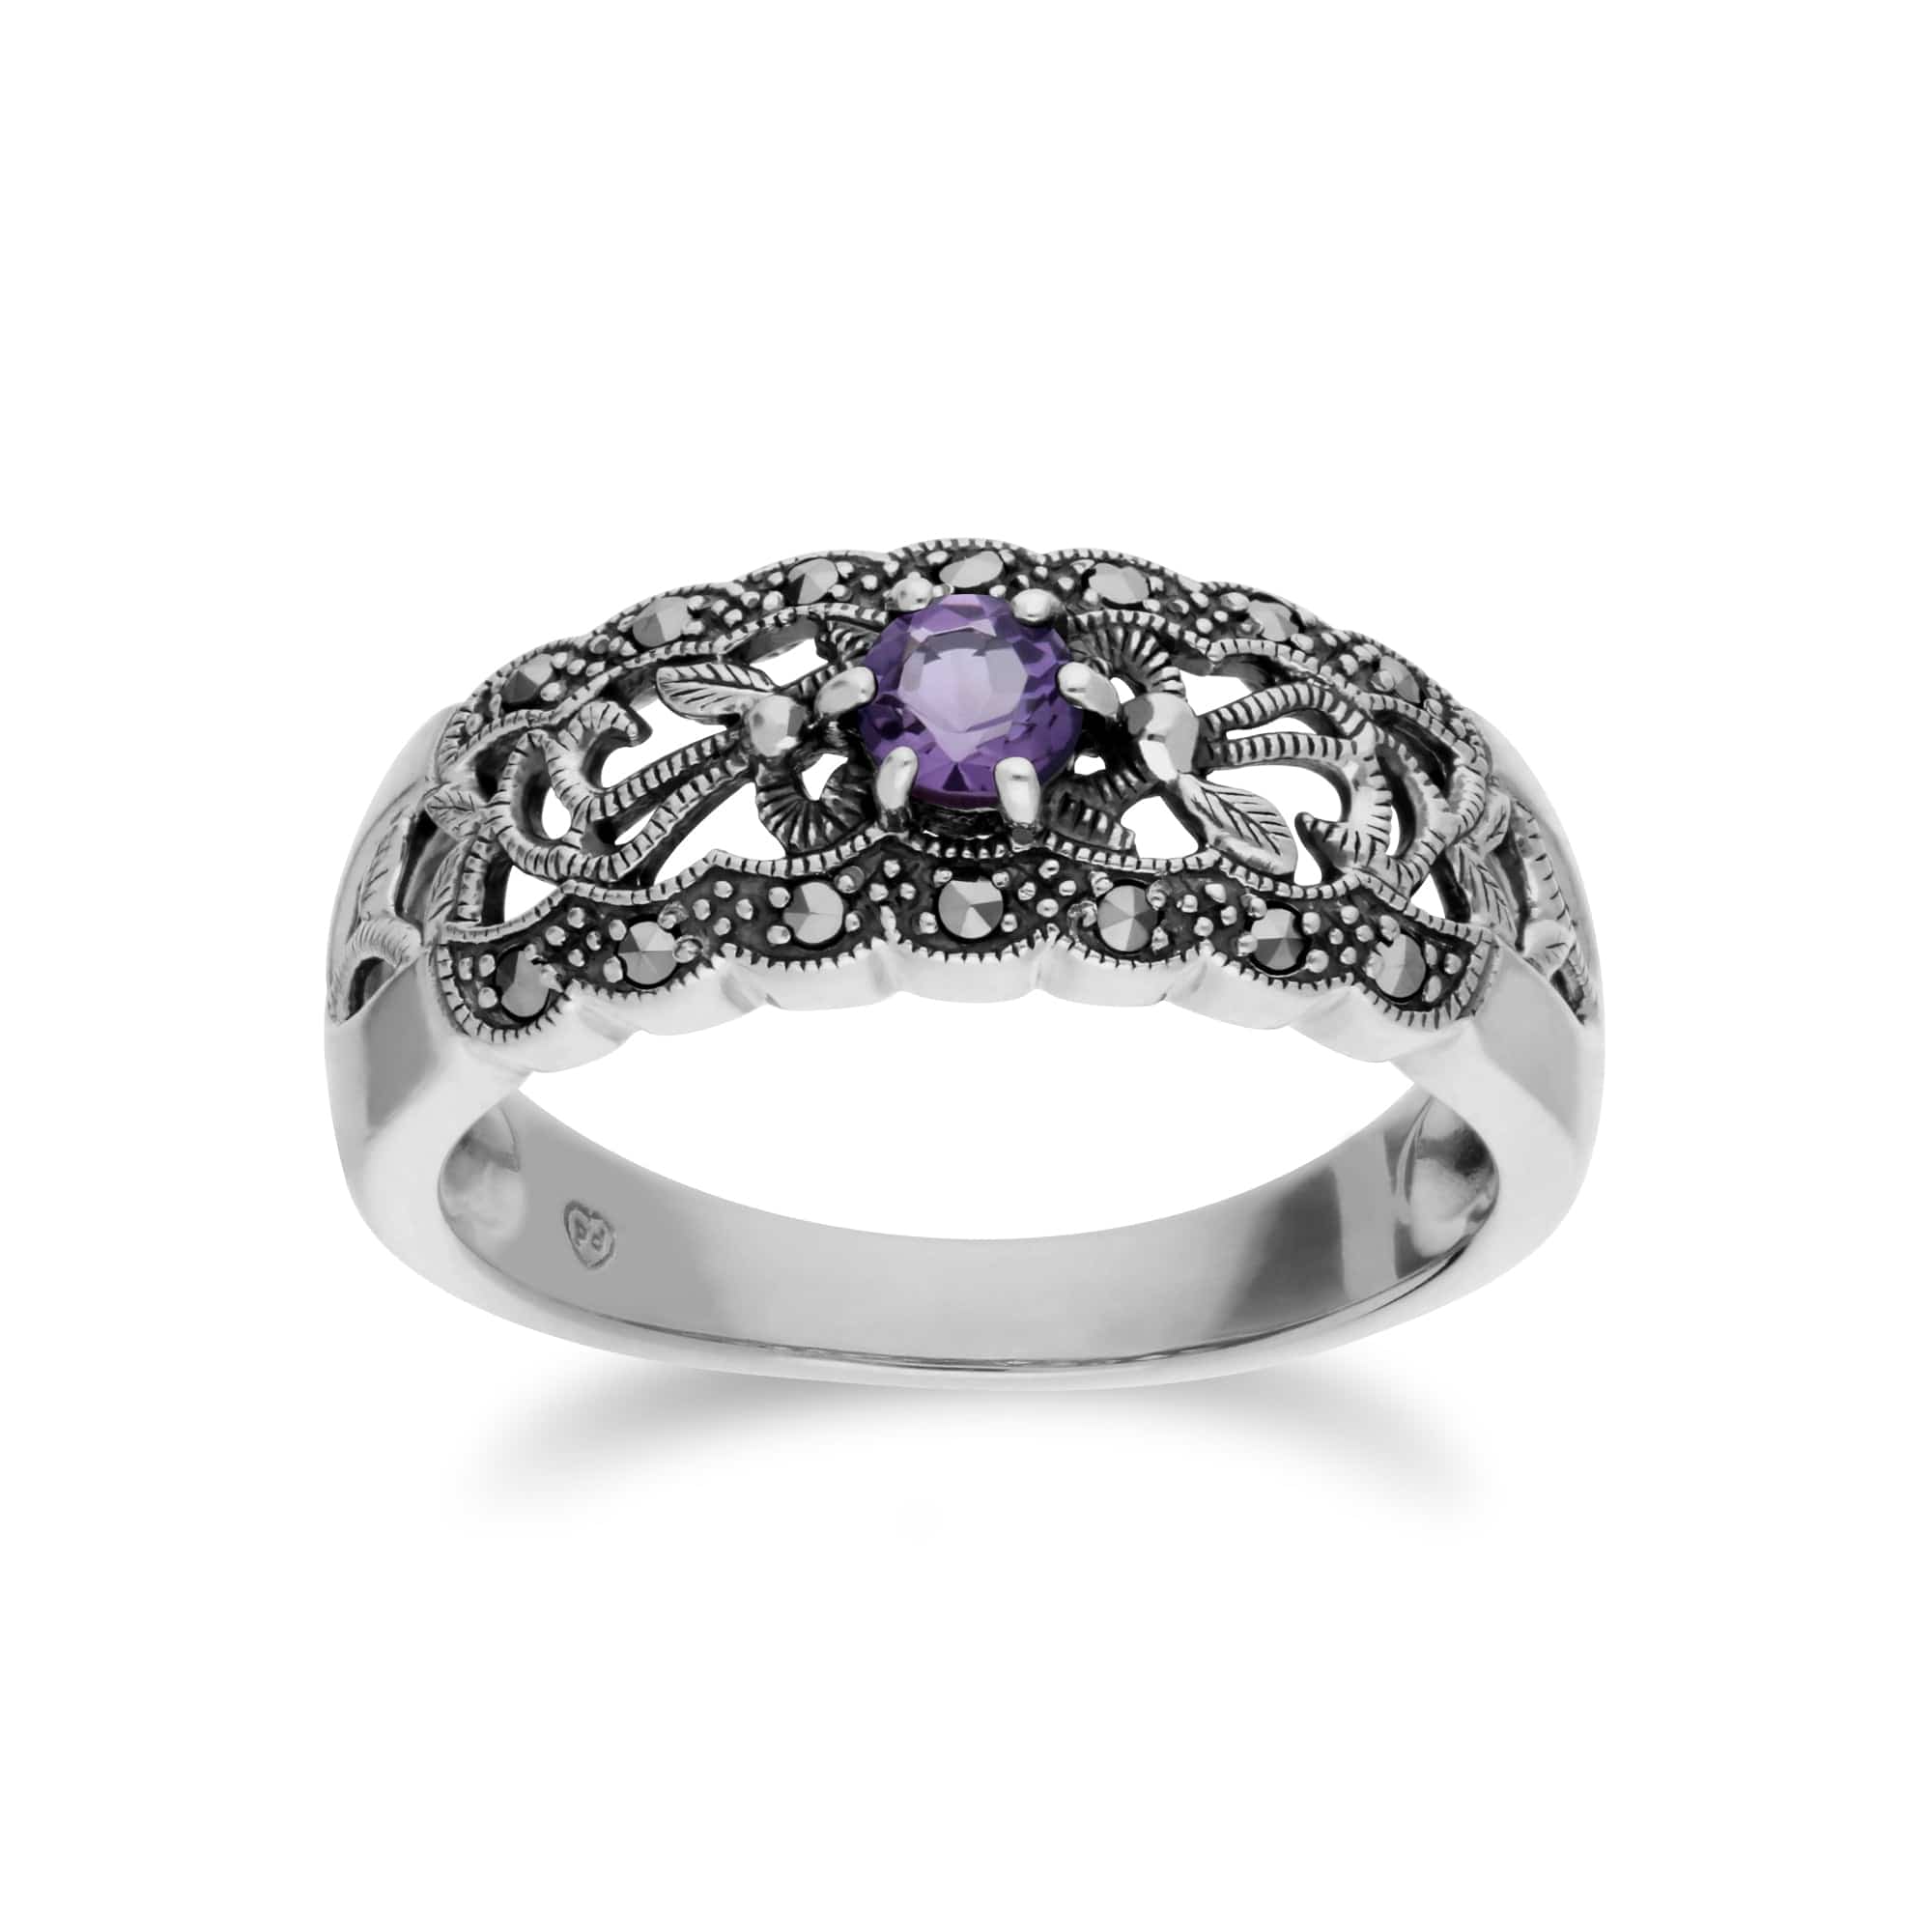 214R597701925 Art Nouveau Style Round Amethyst & Marcasite Floral Band Ring in 925 Sterling Silver 1